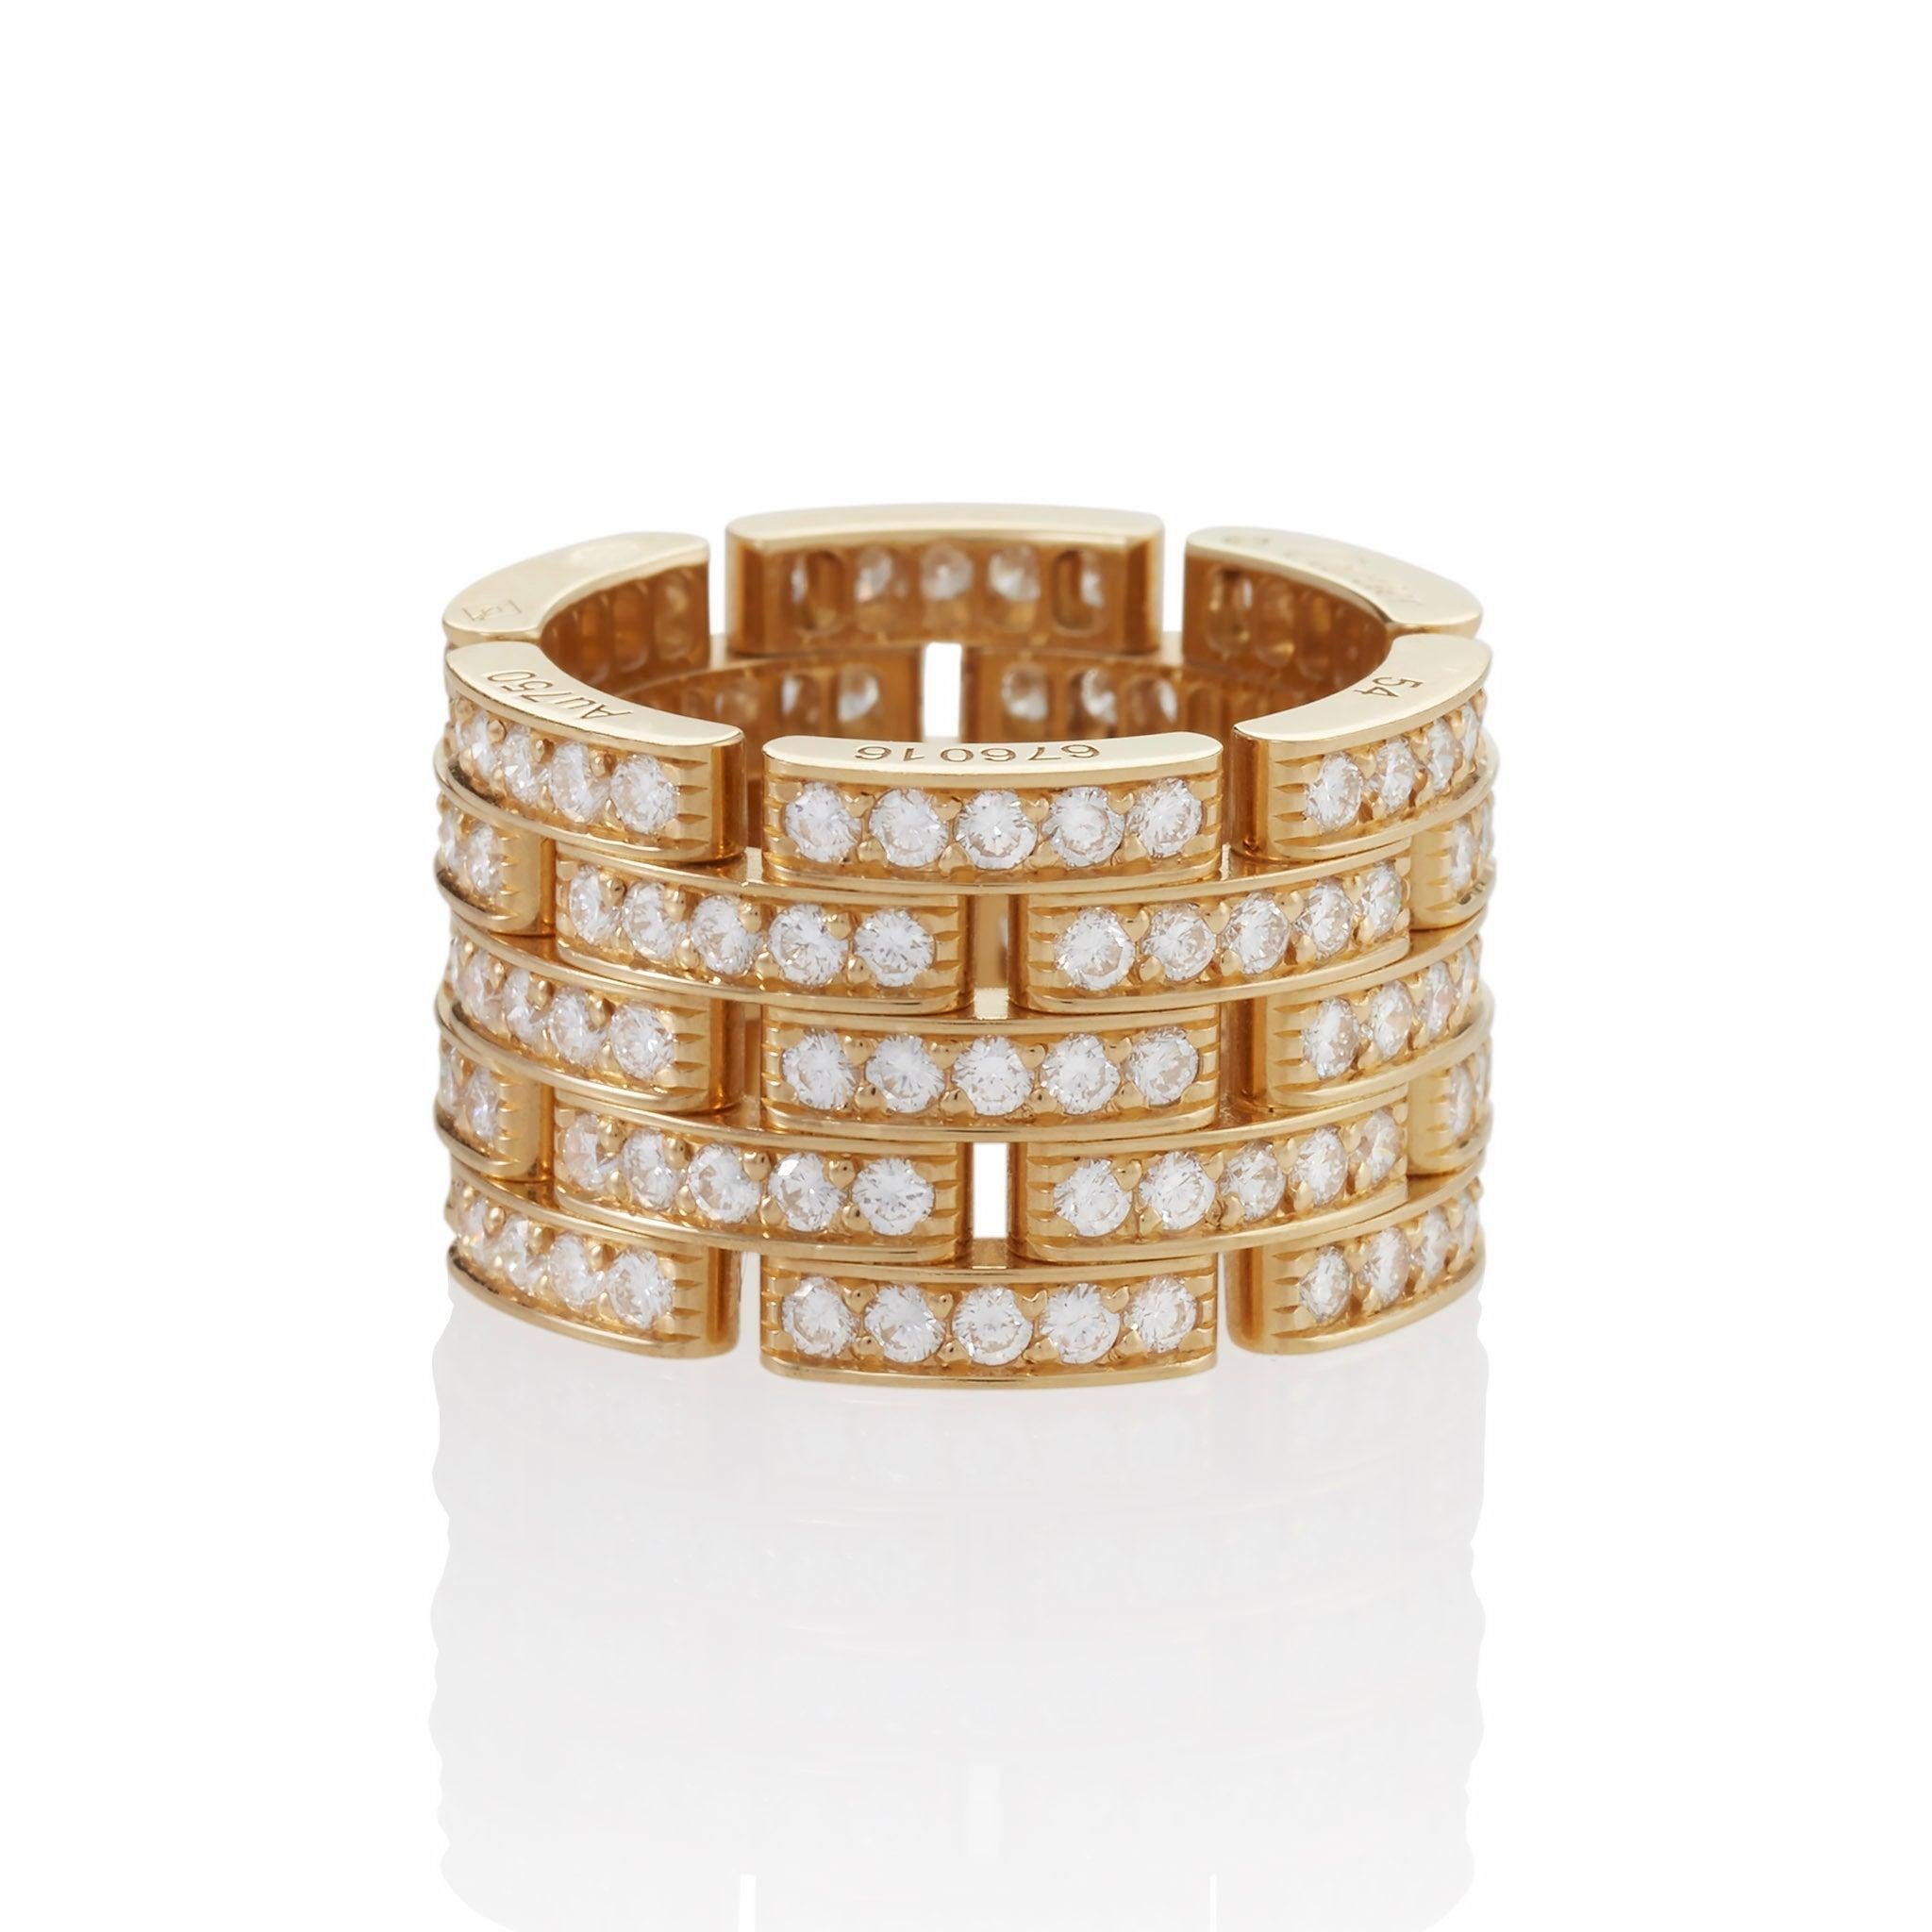 This contemporary 5-row “Panthère” ring by Cartier Paris is composed of 18K yellow gold and diamonds. The wide band is designed as interlocking brick-work links pave-set with 150 round brilliant-cut diamonds with an approximate total weight of 2.60